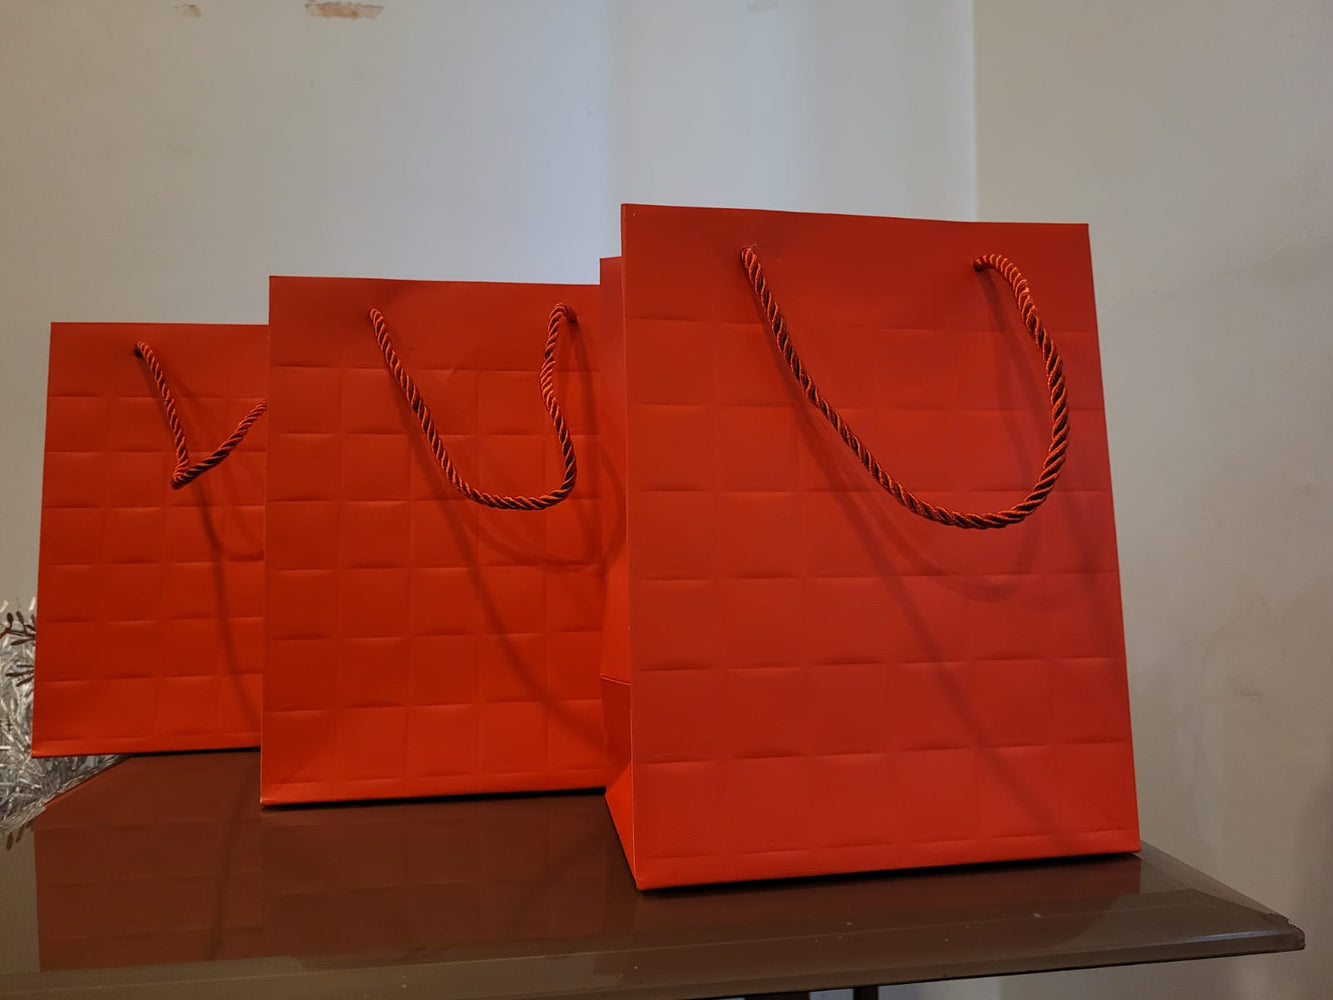 Big Size Paper Bag With Handle 33 x 25 x 12 cm Gift Paper bag, Carry Bags, gift bag, gift for Birthday, gift for Festivals, Season's Greetings and other Events(Red)